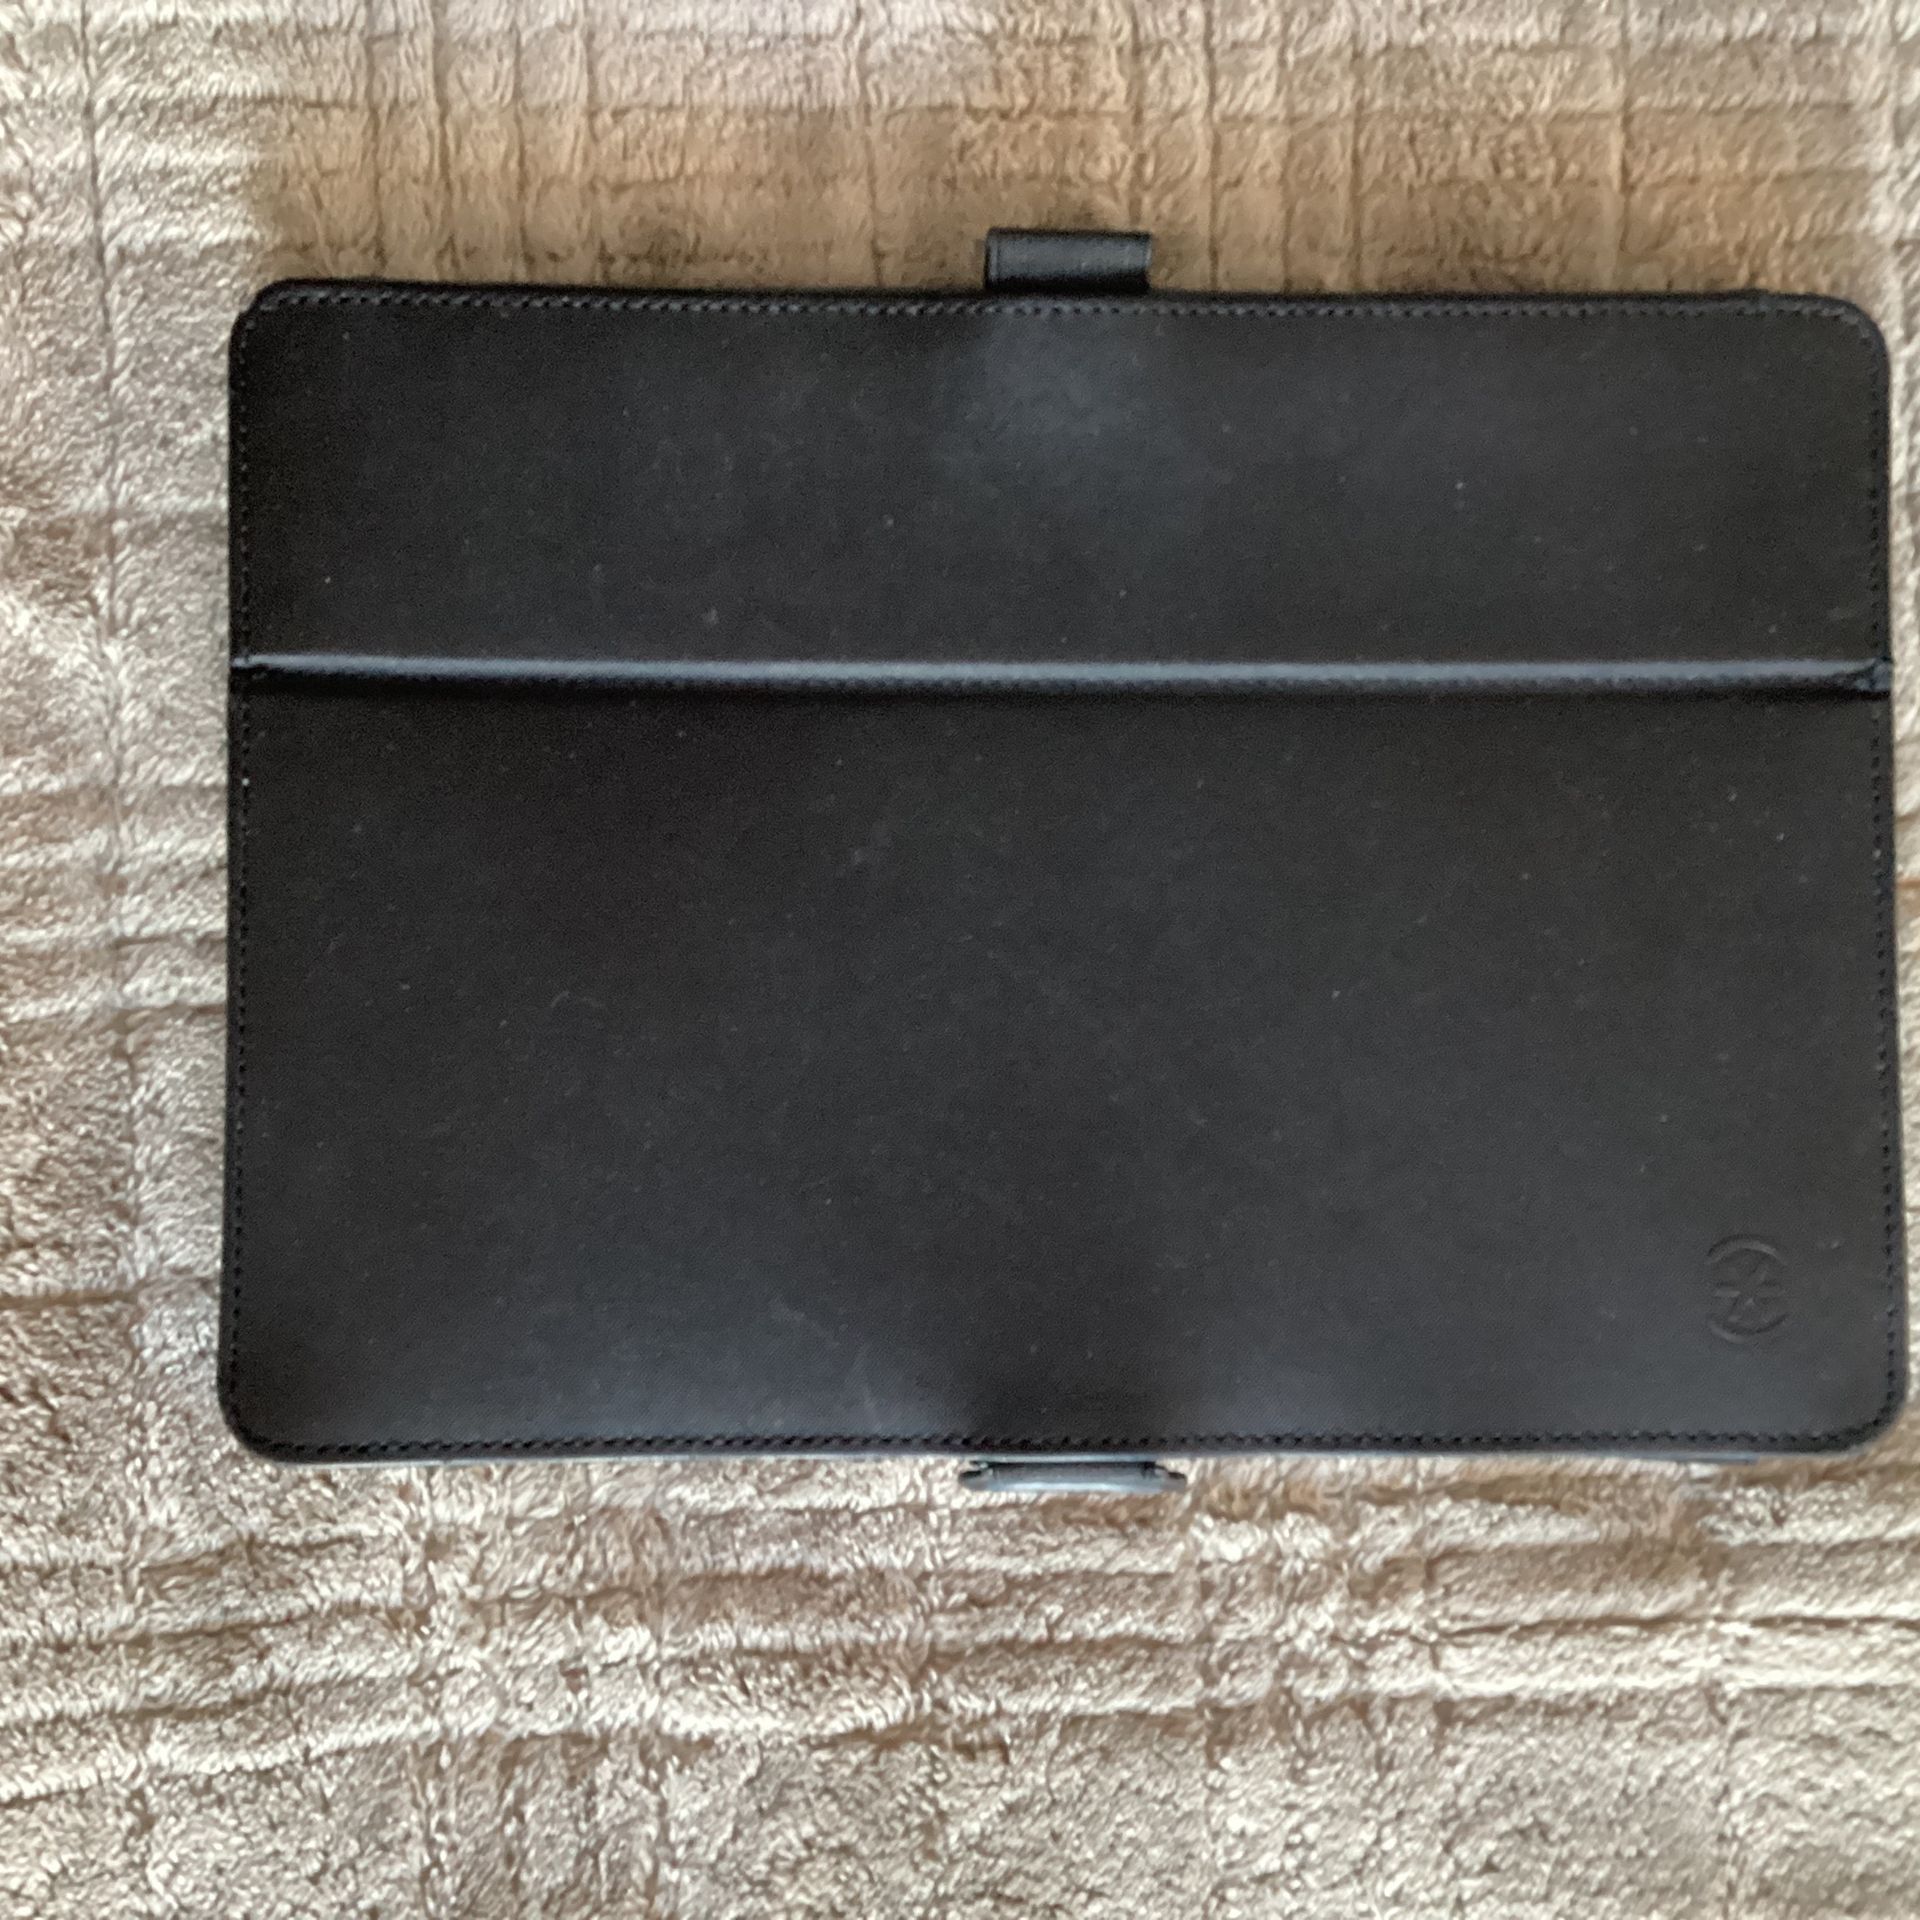 SPECK brand case for an apple iPad Generation 9